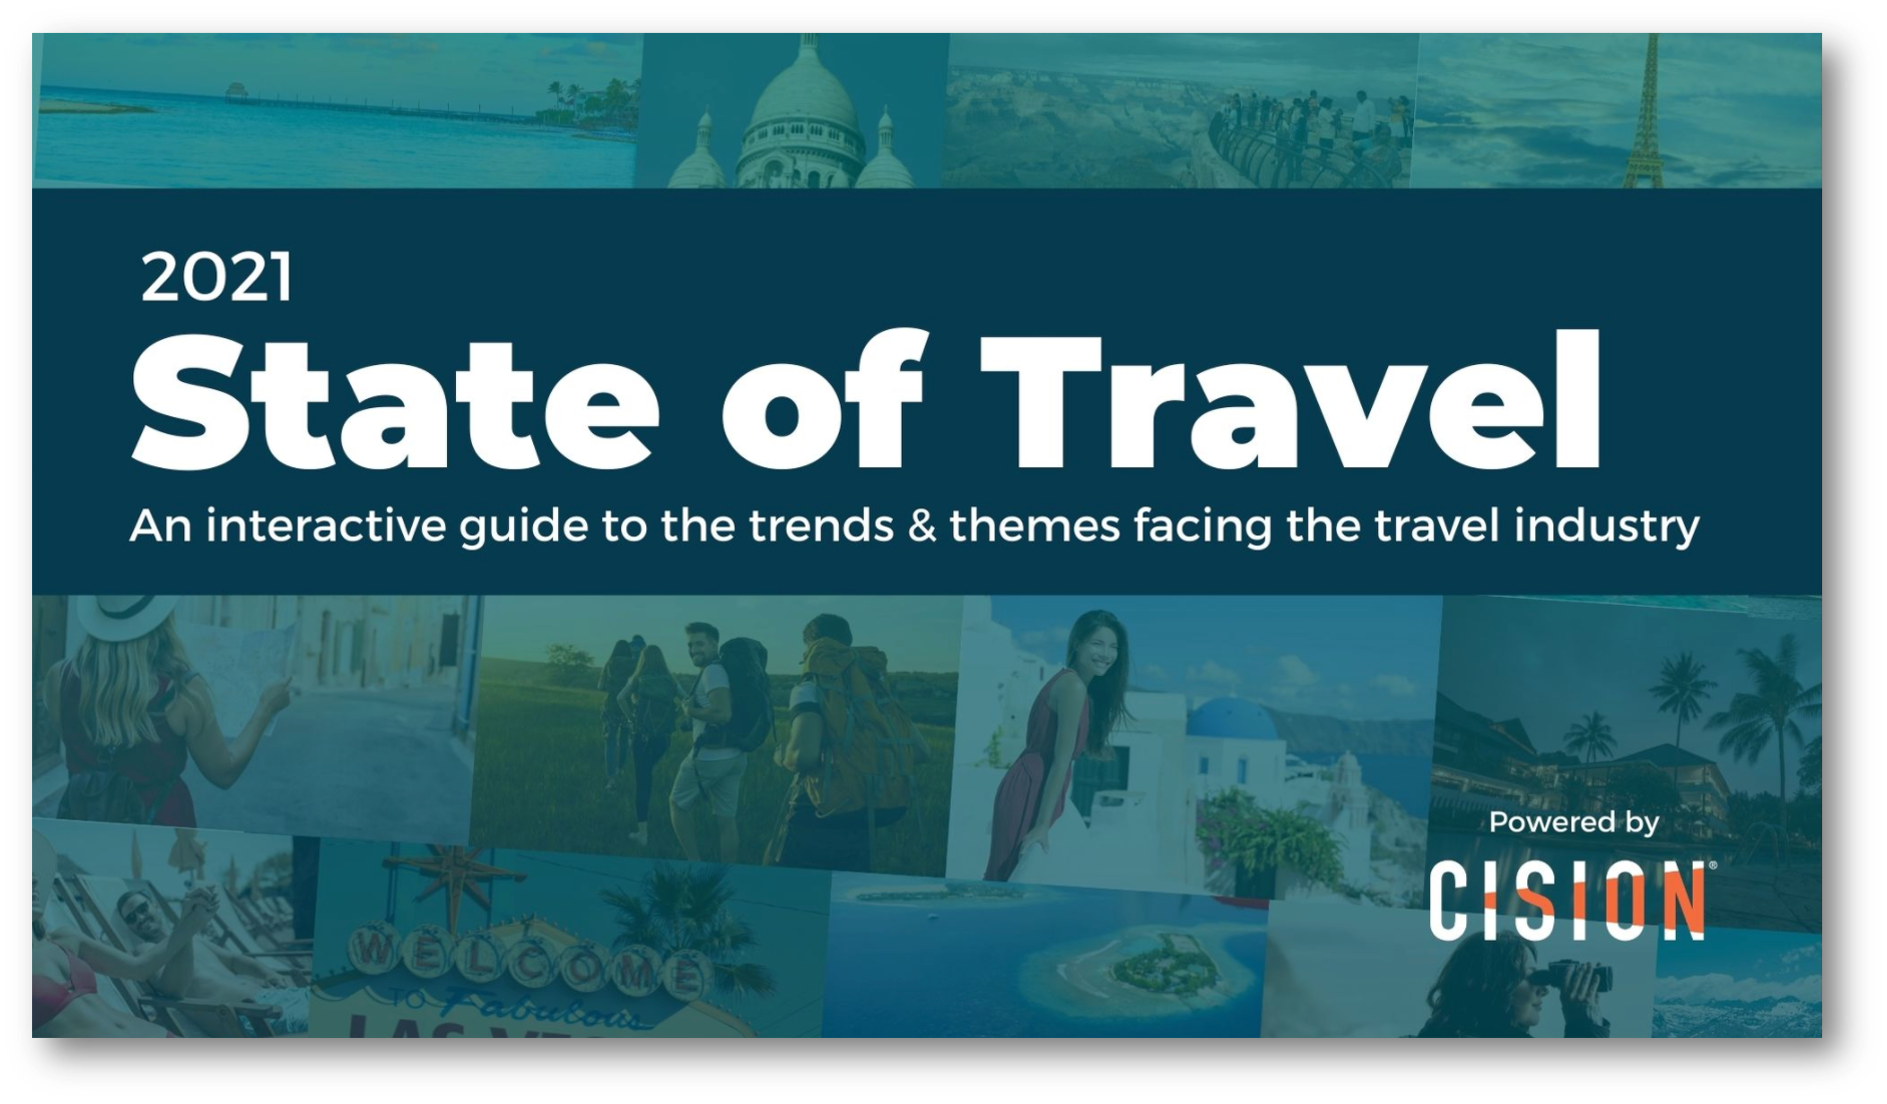 2021 State of Travel